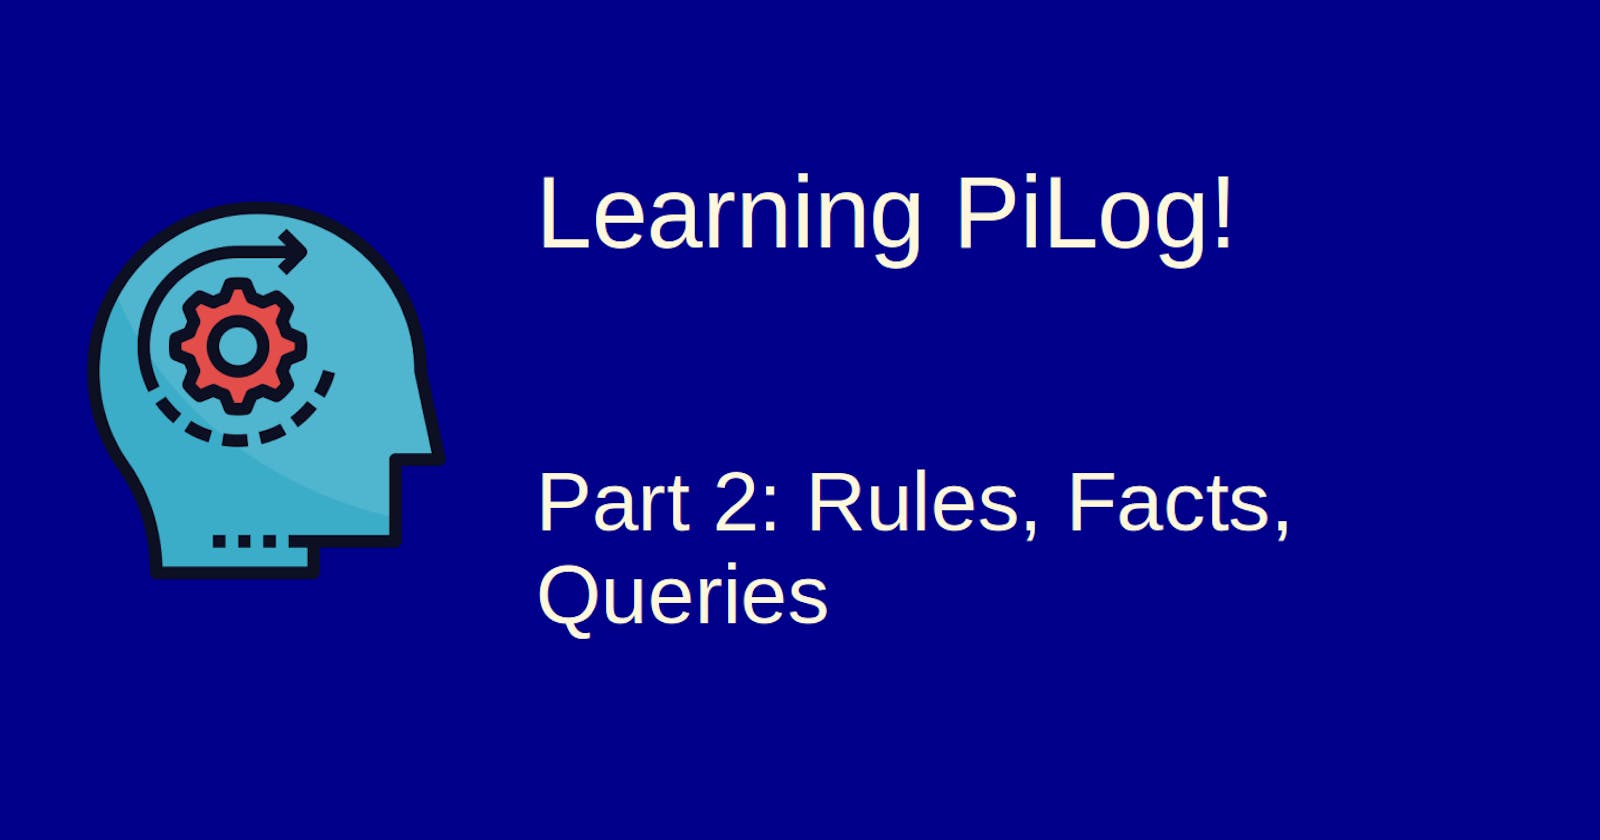 Learning Pilog - 2: Facts, Rules, Queries